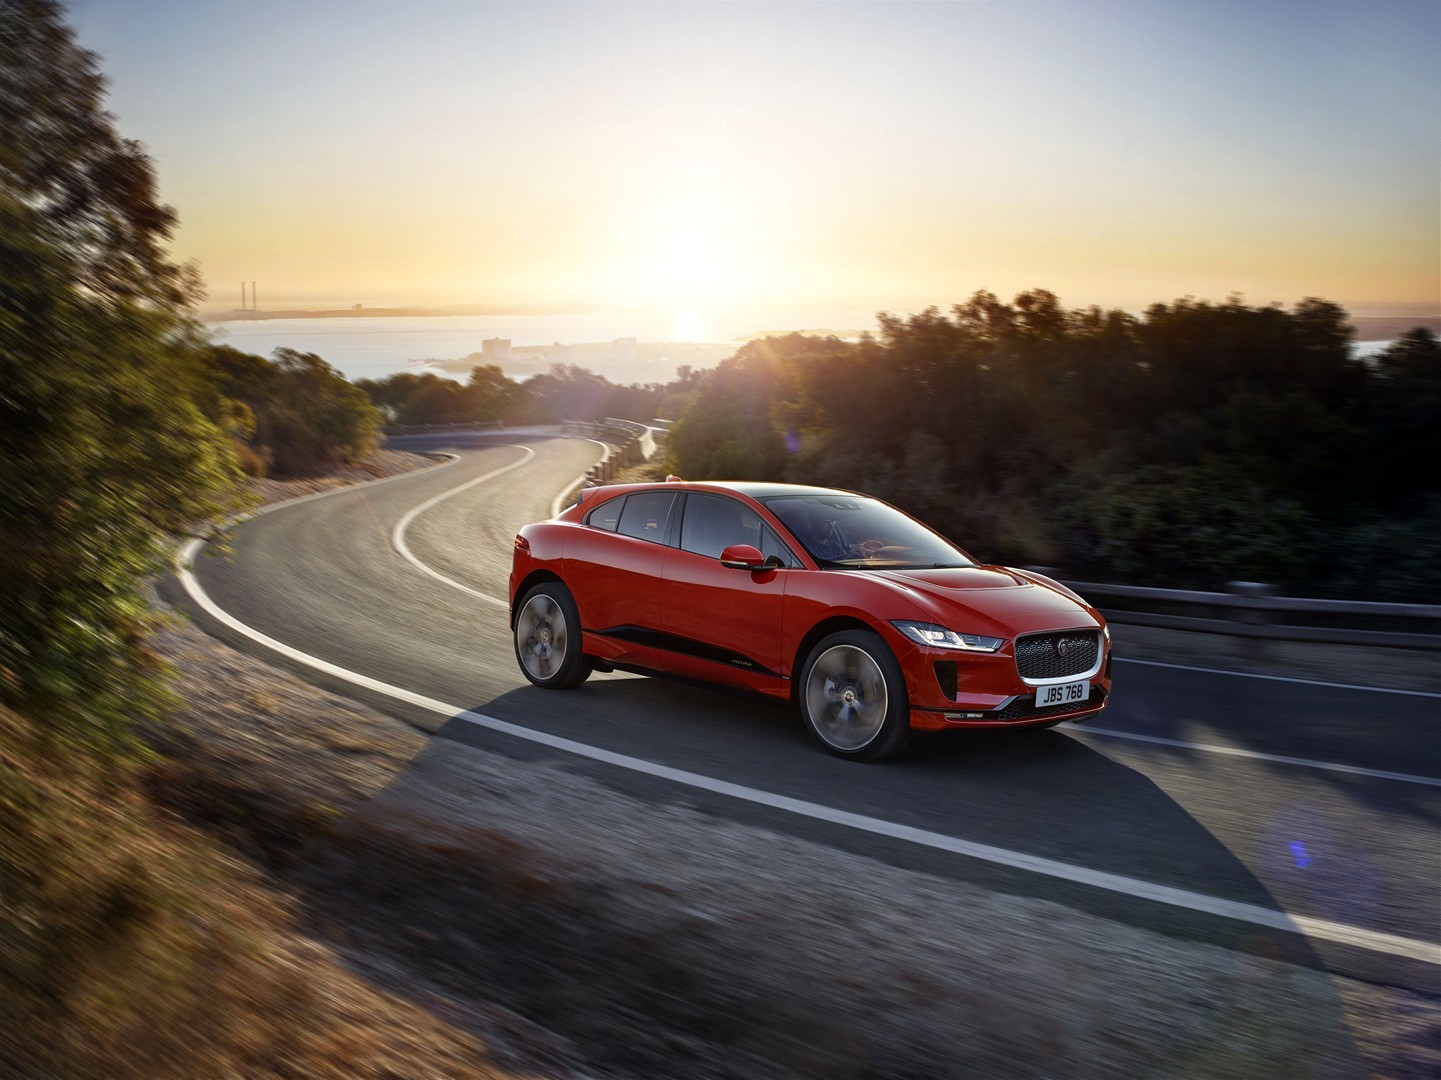 https://s1.cdn.autoevolution.com/images/news/gallery/2020-jaguar-i-pace-update-offers-234-miles-of-range-thanks-to-etrophy-know-how_49.jpg